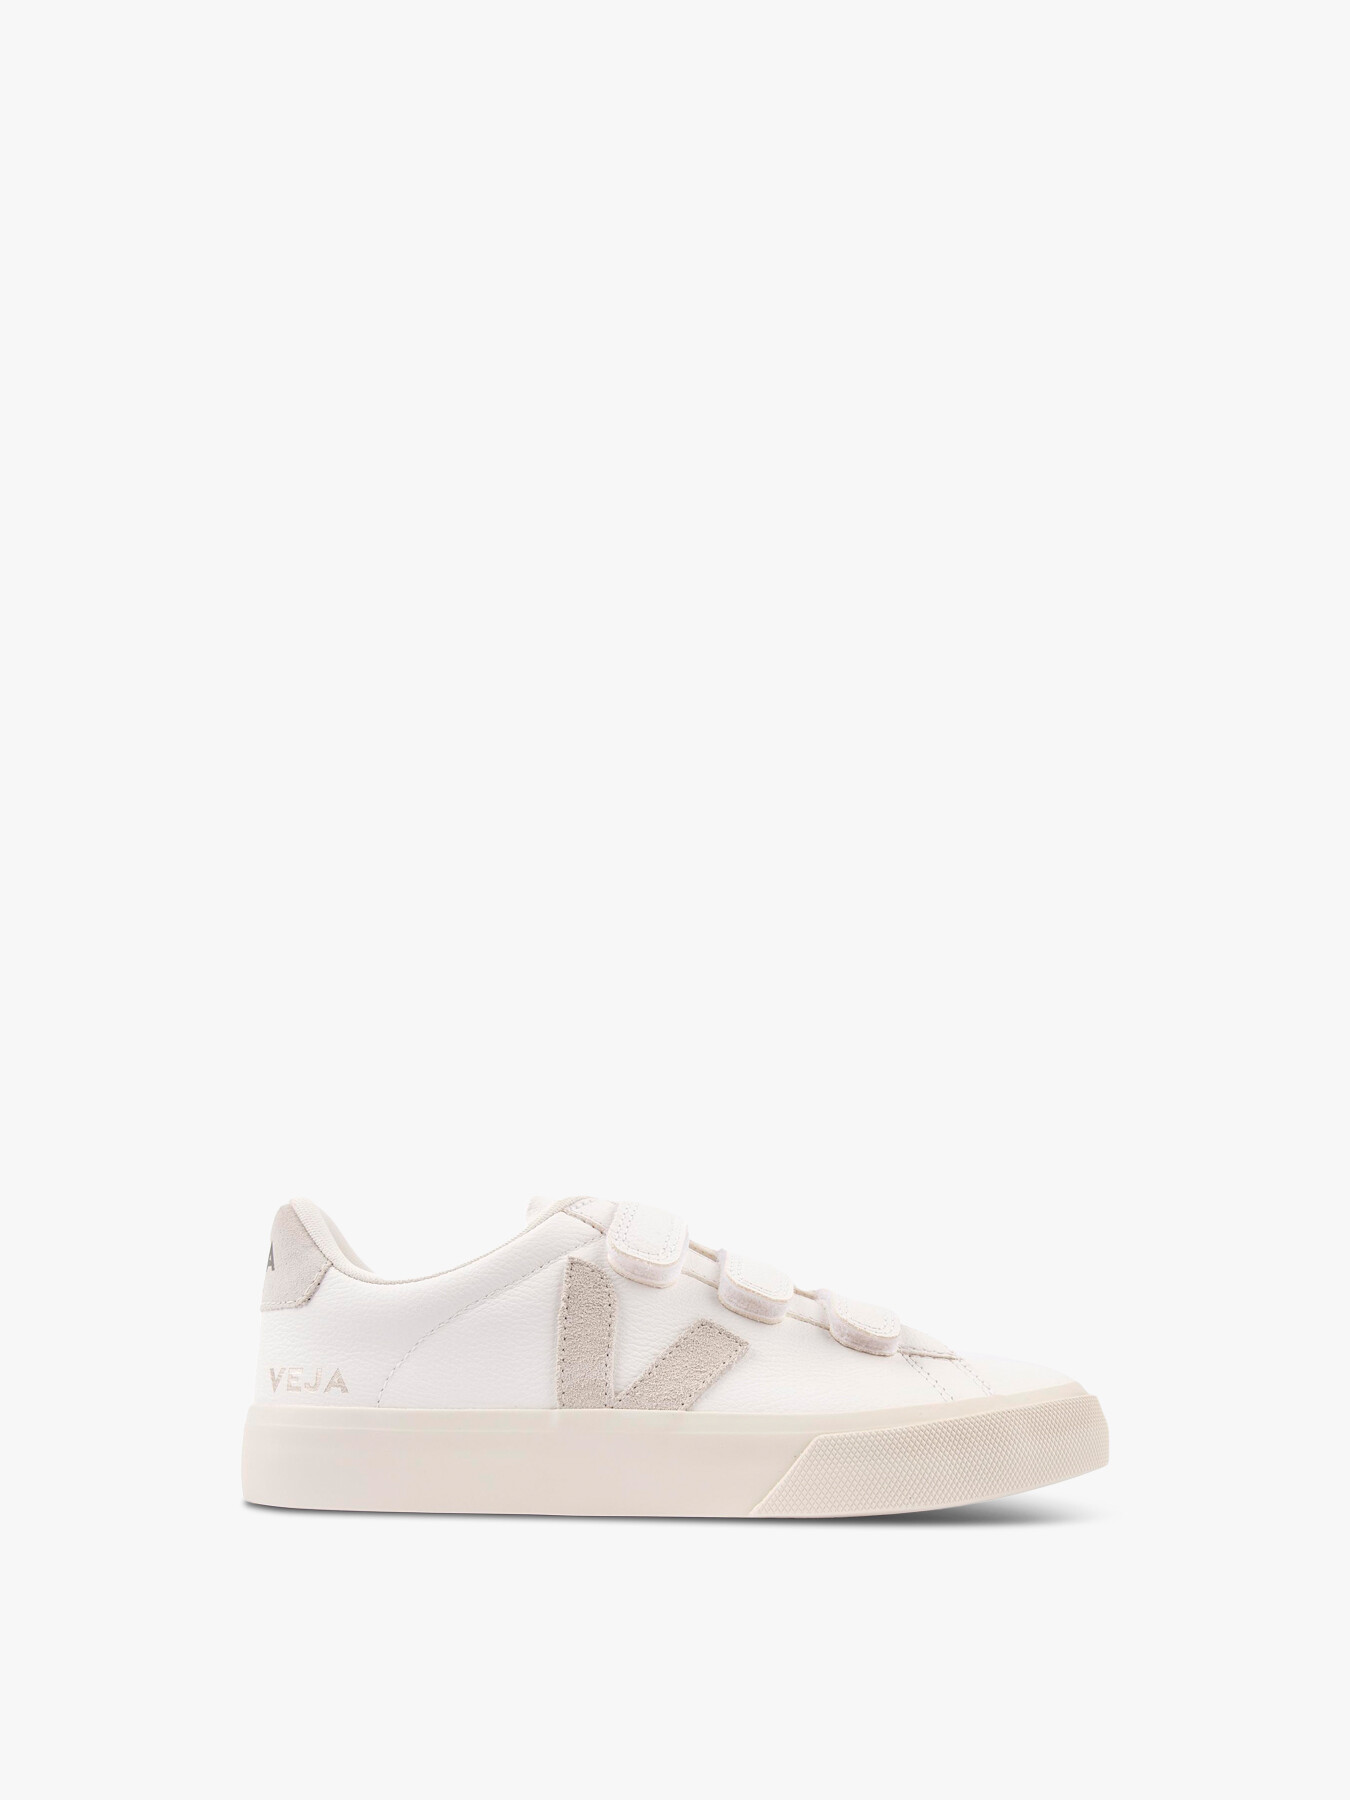 Veja Recife Velcro Leather Trainers In White